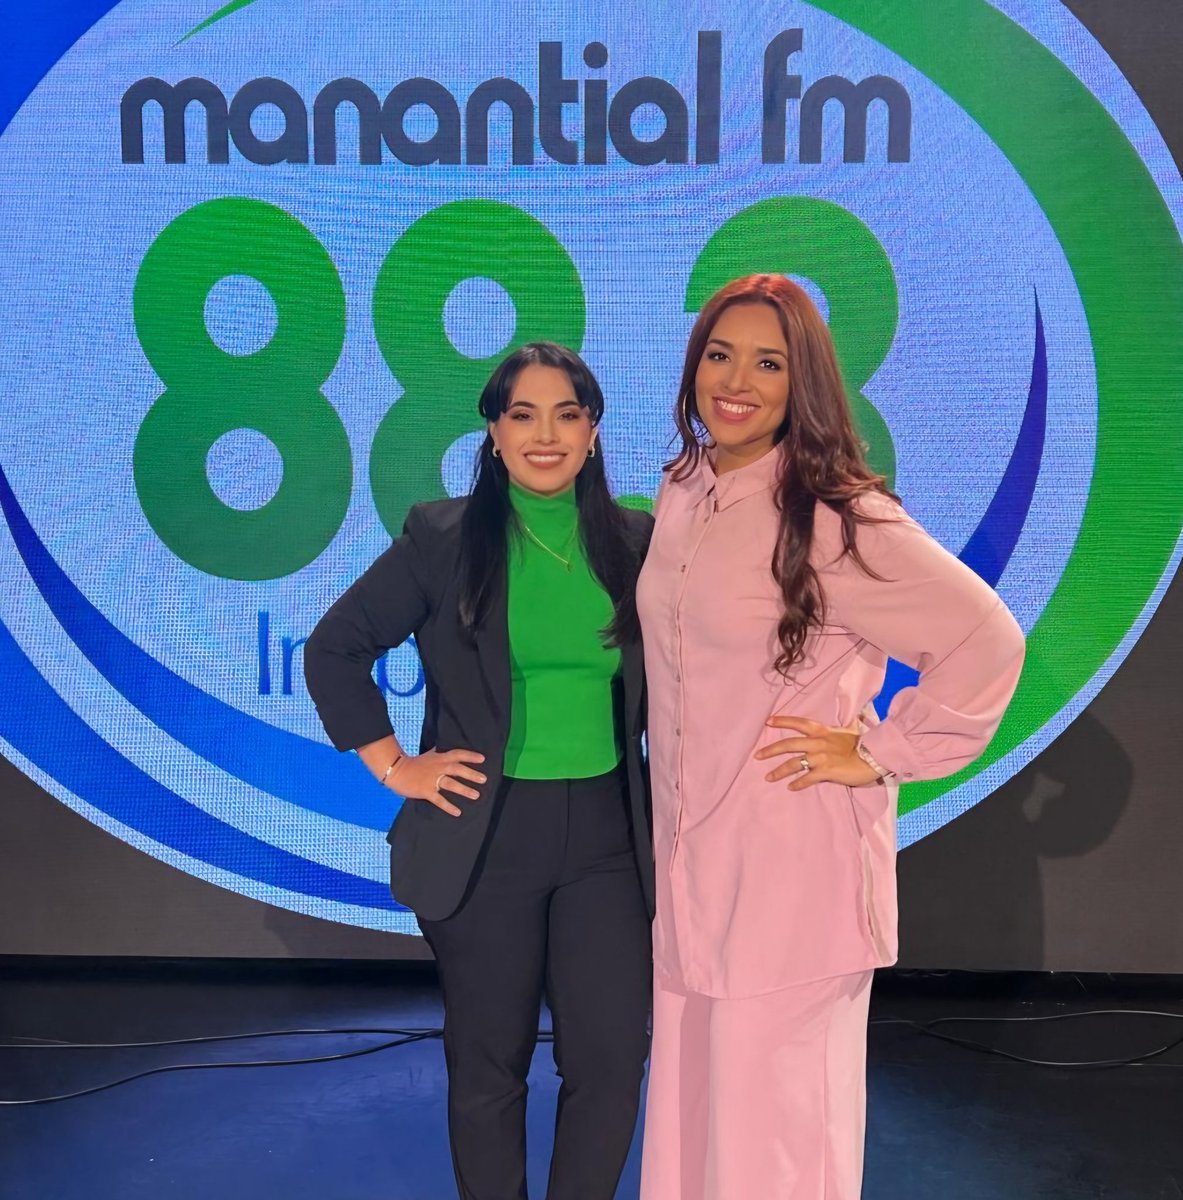 I was super excited to attend the KBNR Radio Manantial 88.3 FM 40 Year Anniversary alongside my friends in Brownsville at Livingway Family Church. Glory Be To God ✝️